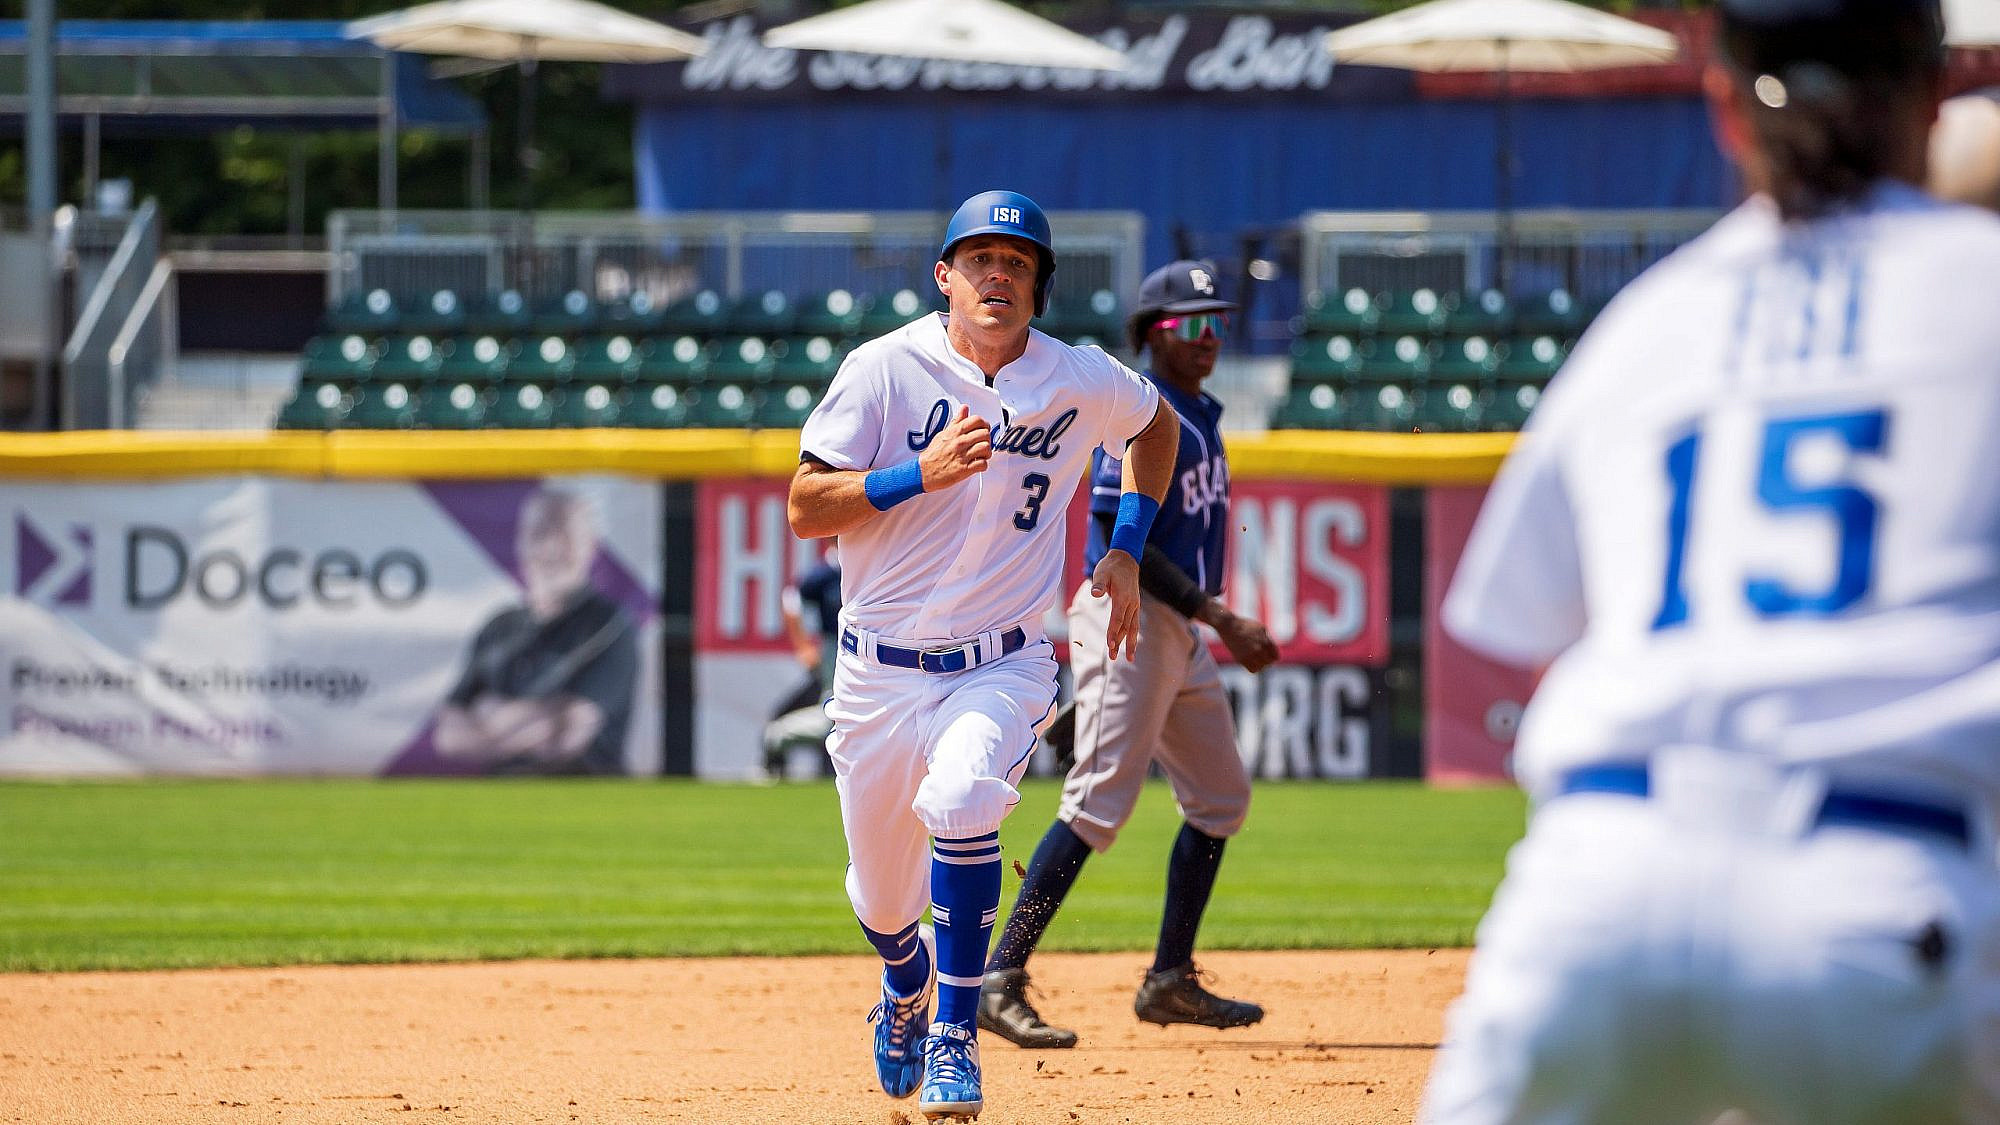 Team Israel battles it out in the World Baseball Classic in Miami from March 11 to March 15, 2023. Credit: Israel Association of Baseball.